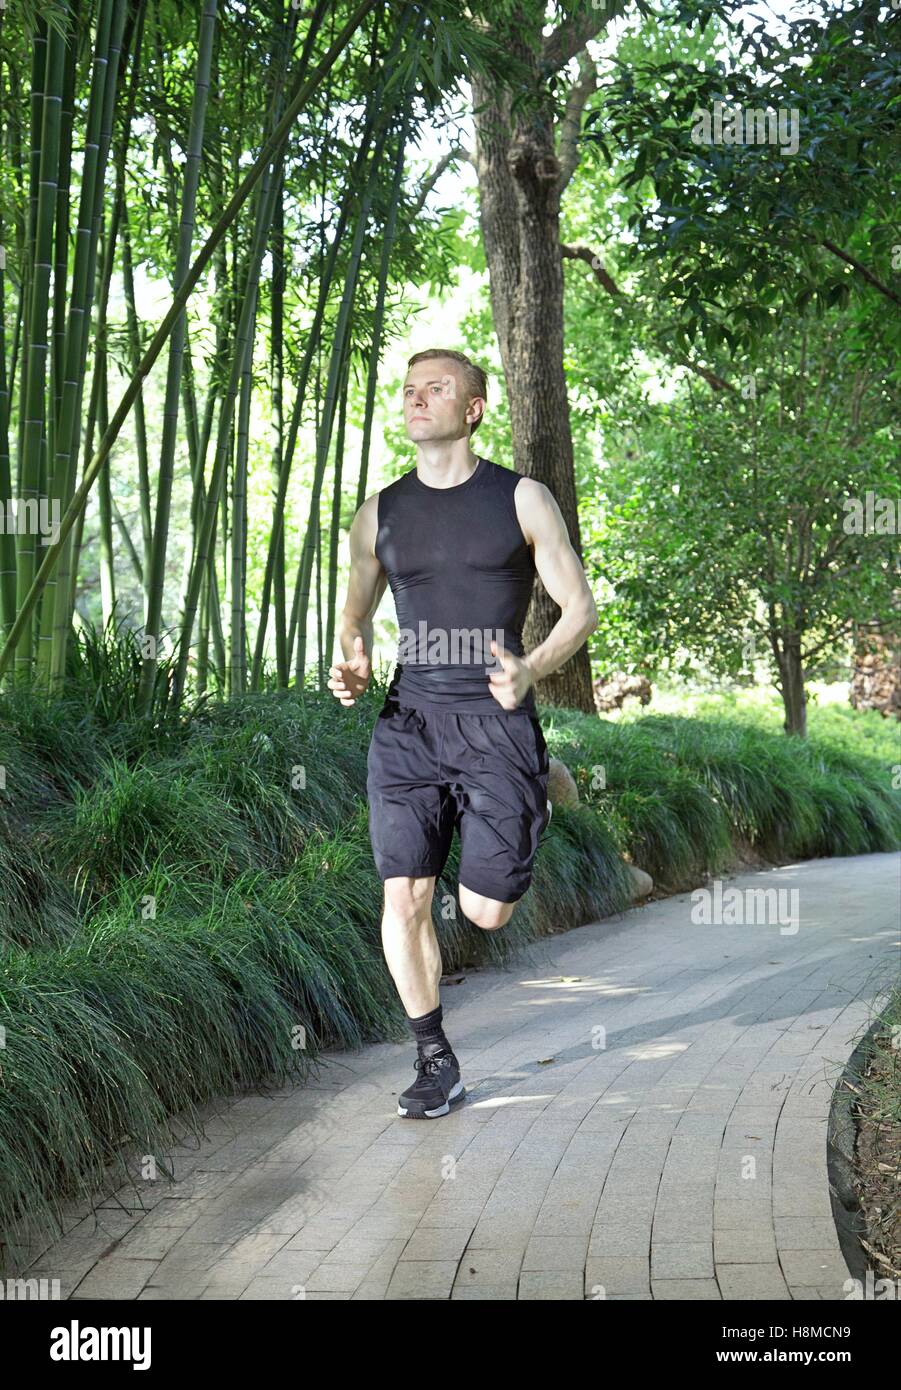 Fit and Healthy Caucasian man running in park Stock Photo